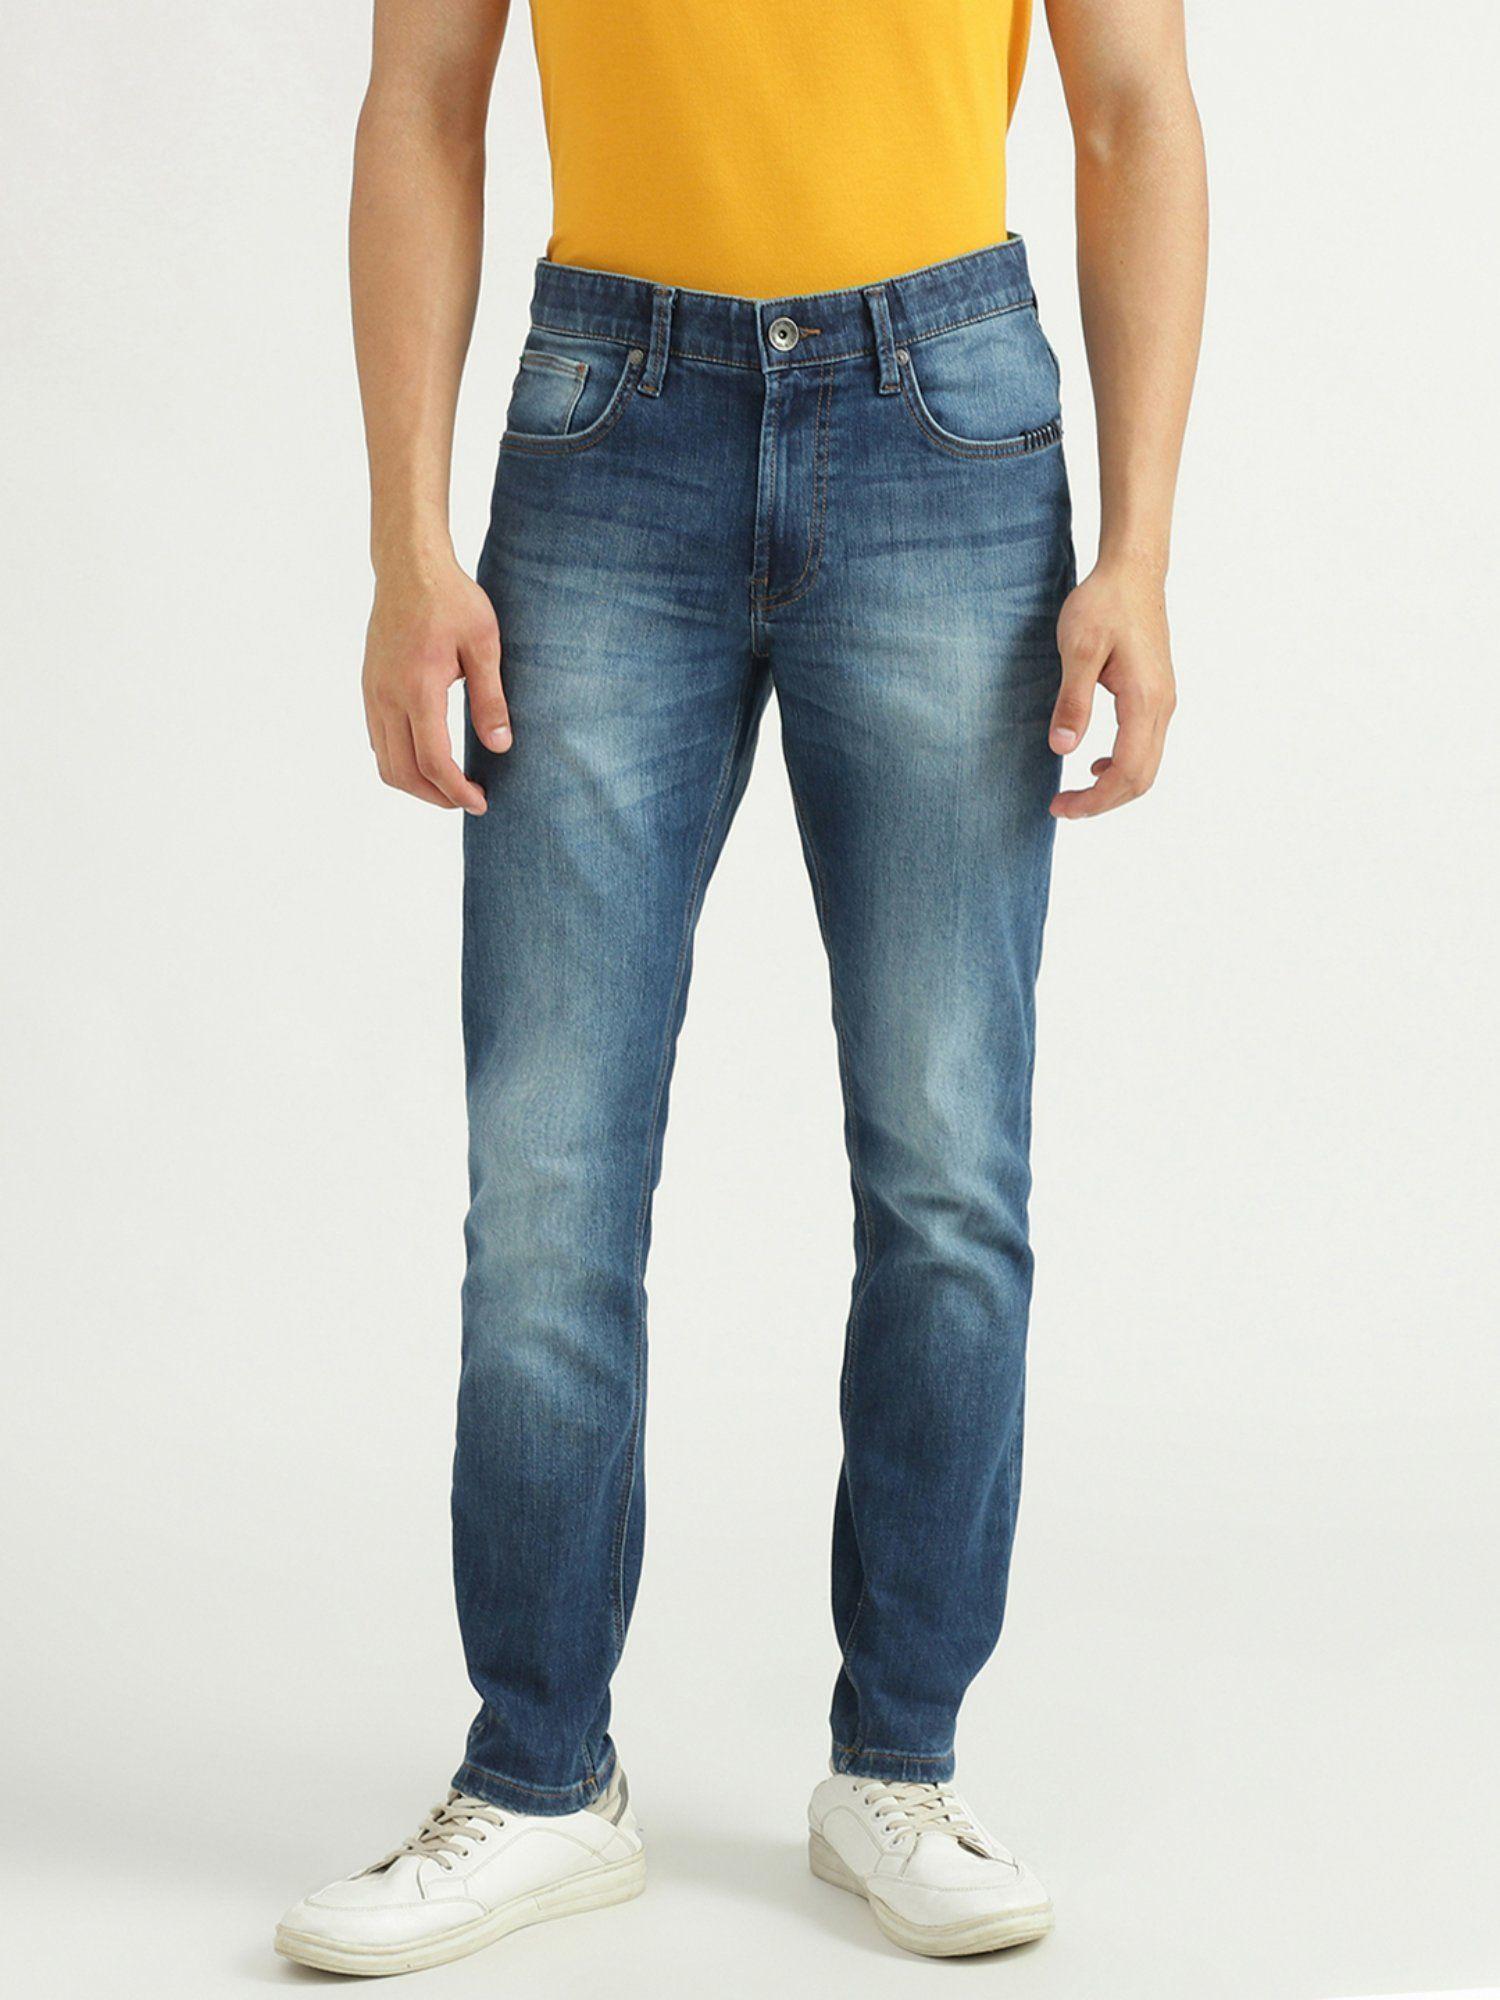 mens-solid-jeans-blue